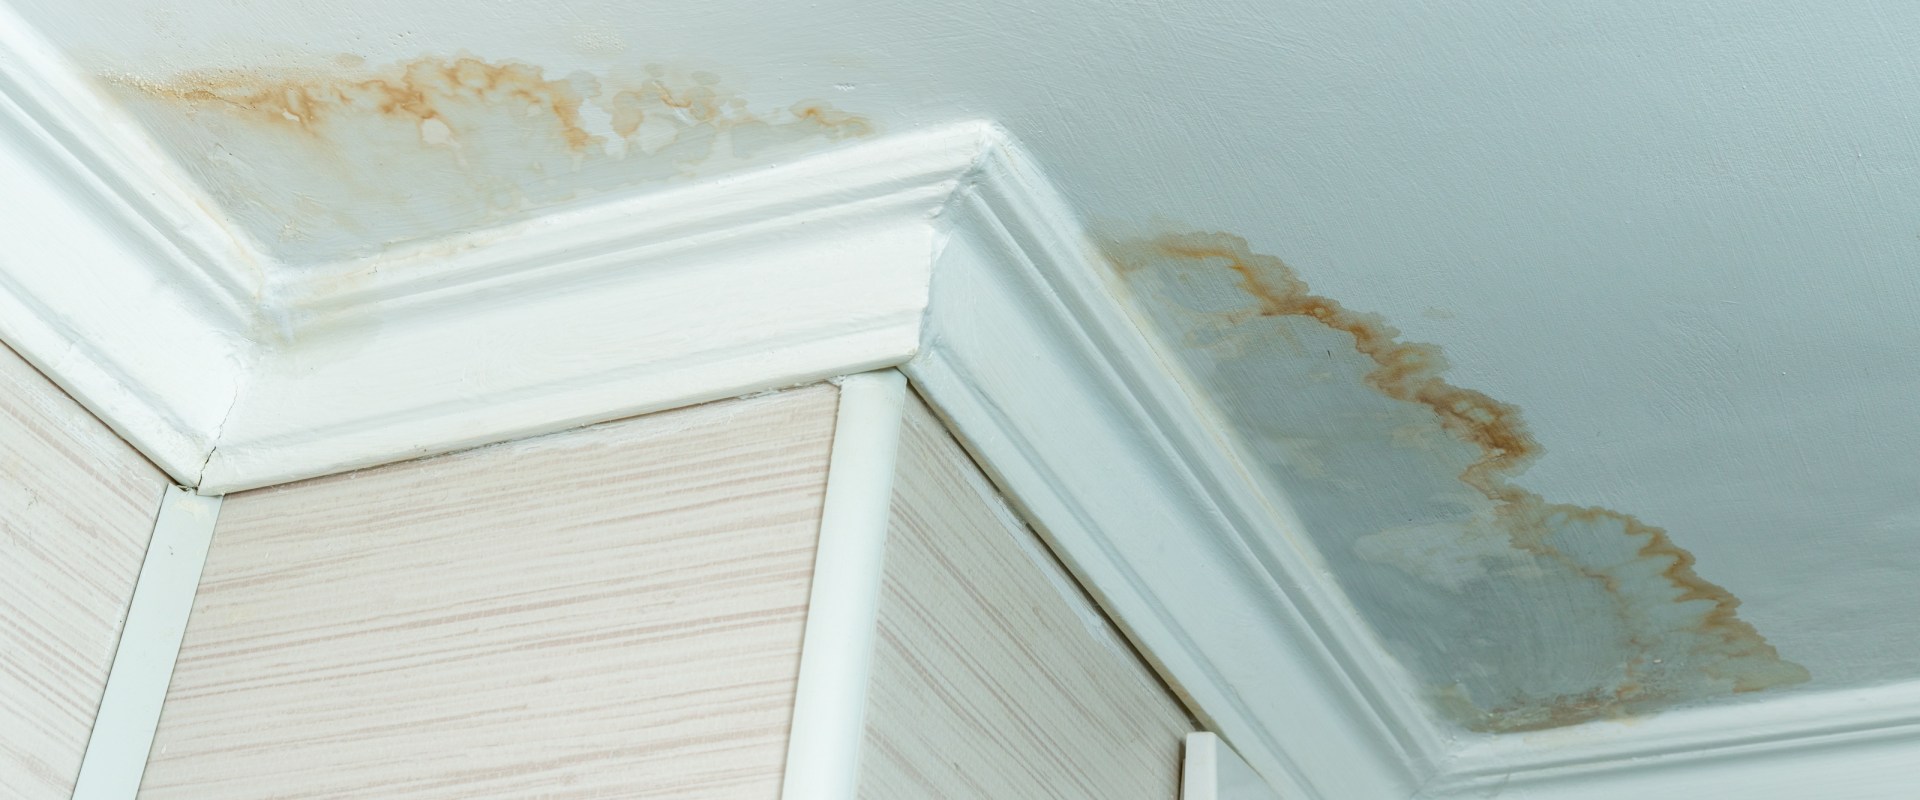 How do you paint water damaged walls?